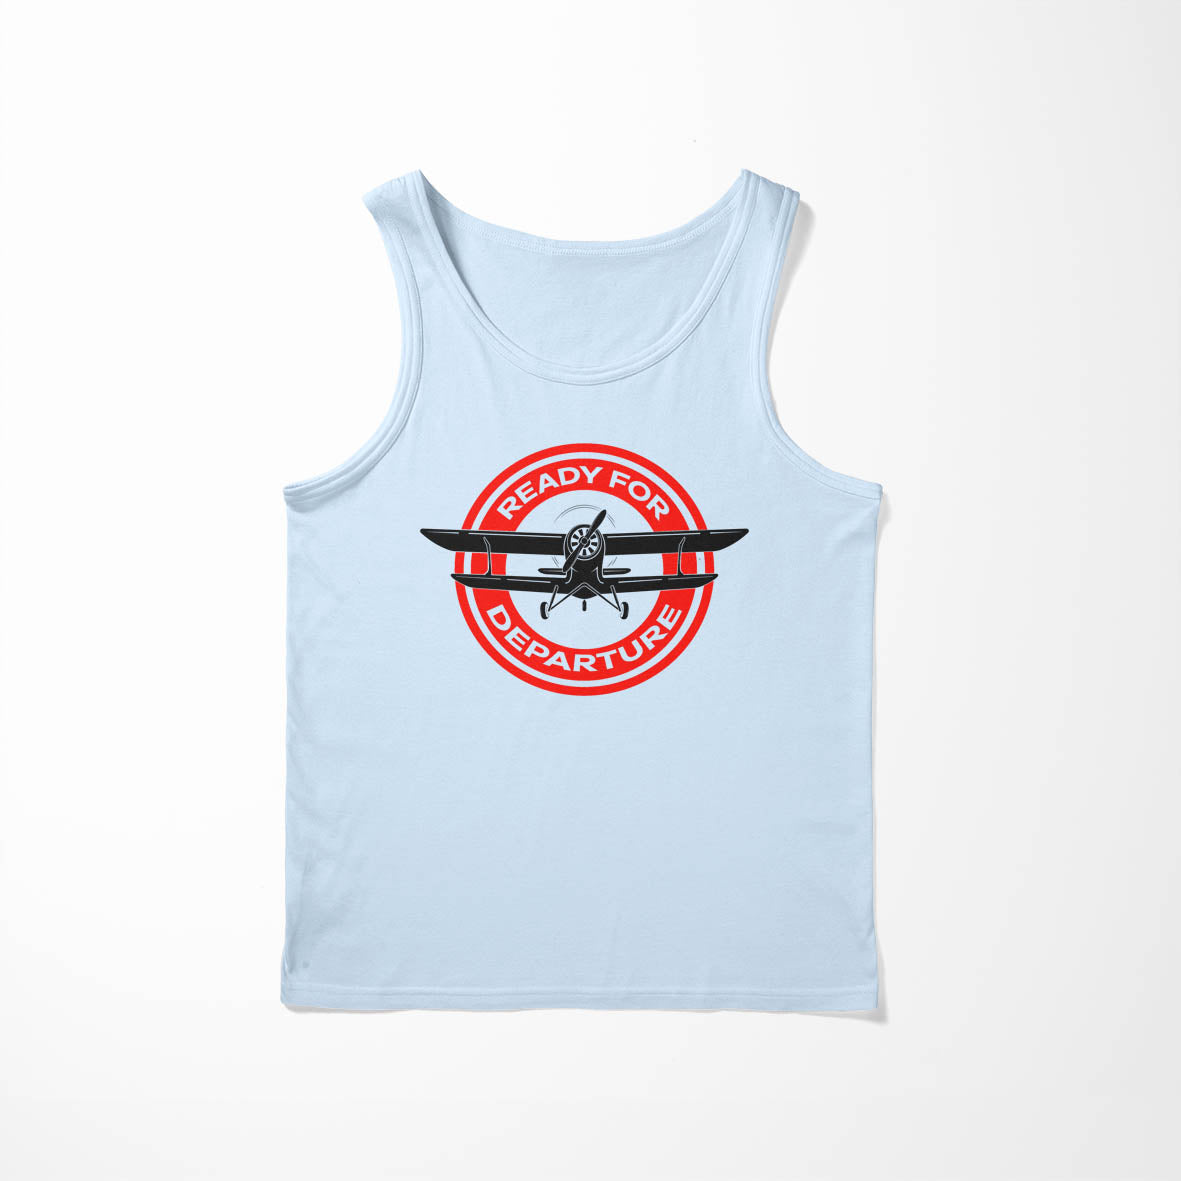 Ready for Departure Designed Tank Tops